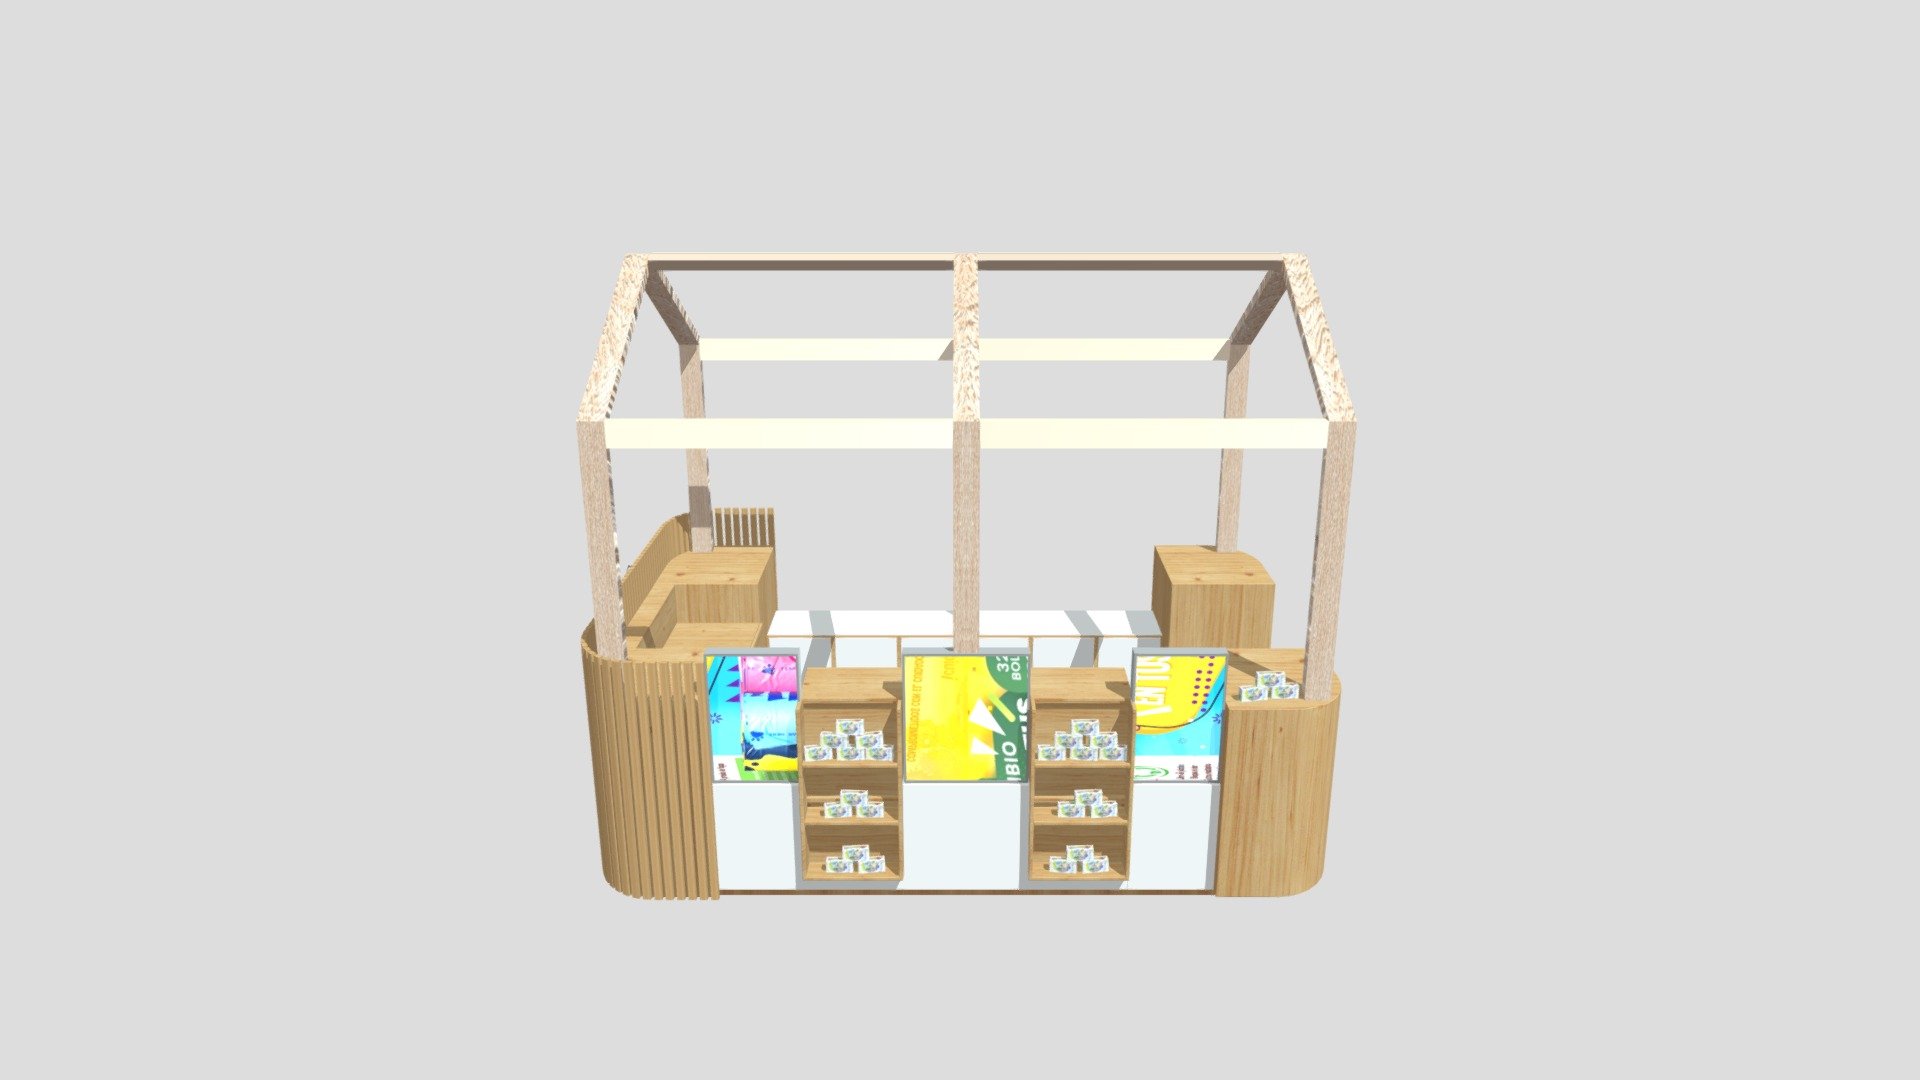 Mall kiosk Design in bone shape with wooden furniture and a metal structure with hanging plants - NAtupets op2 - 3D model by lfsolano13 3d model